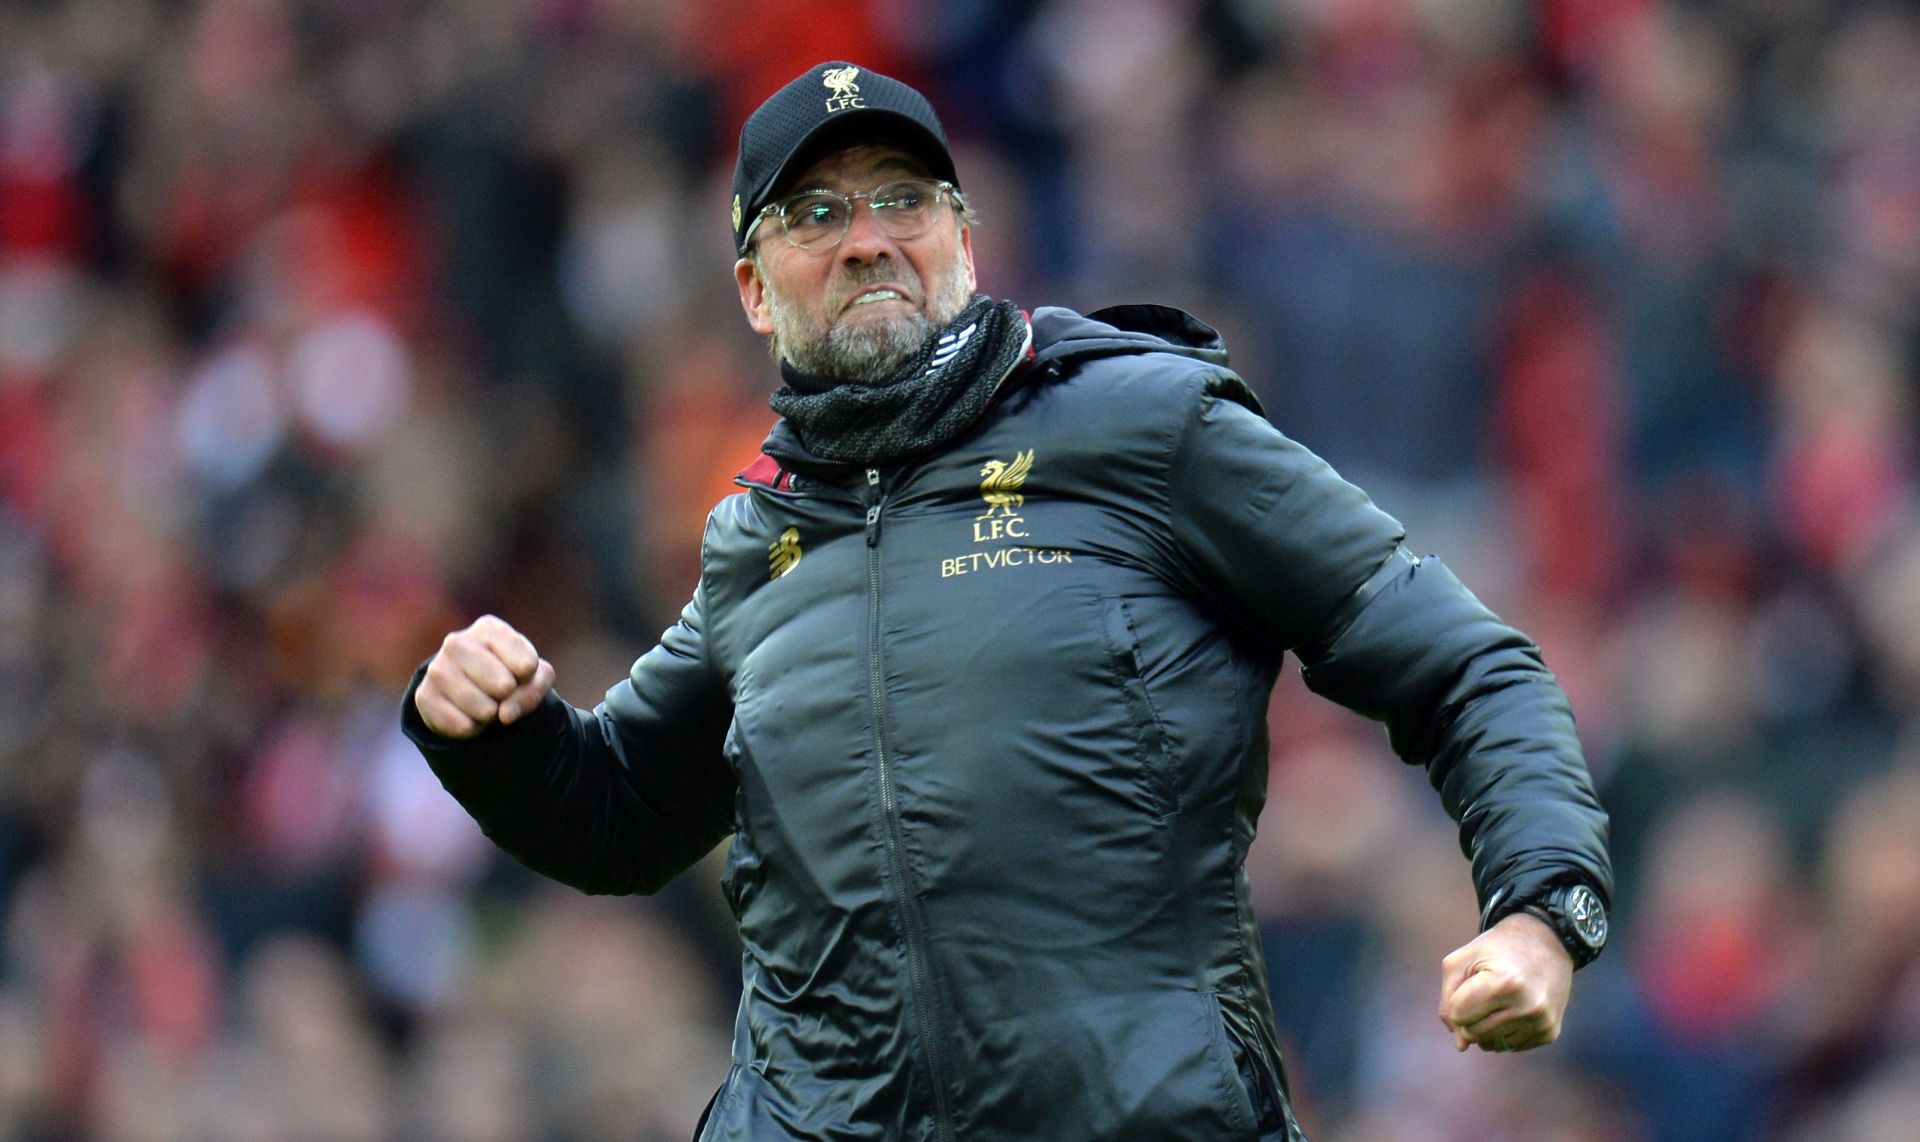 epa07506905 Liverpool manager Jurgen Klopp celebrates their win at the end of the English Premier League match between Liverpool FC and Chelsea FC at Anfield, Liverpool, Britain, 14 April 2019.  EPA/PETER POWELL EDITORIAL USE ONLY. No use with unauthorized audio, video, data, fixture lists, club/league logos or 'live' services. Online in-match use limited to 120 images, no video emulation. No use in betting, games or single club/league/player publications.